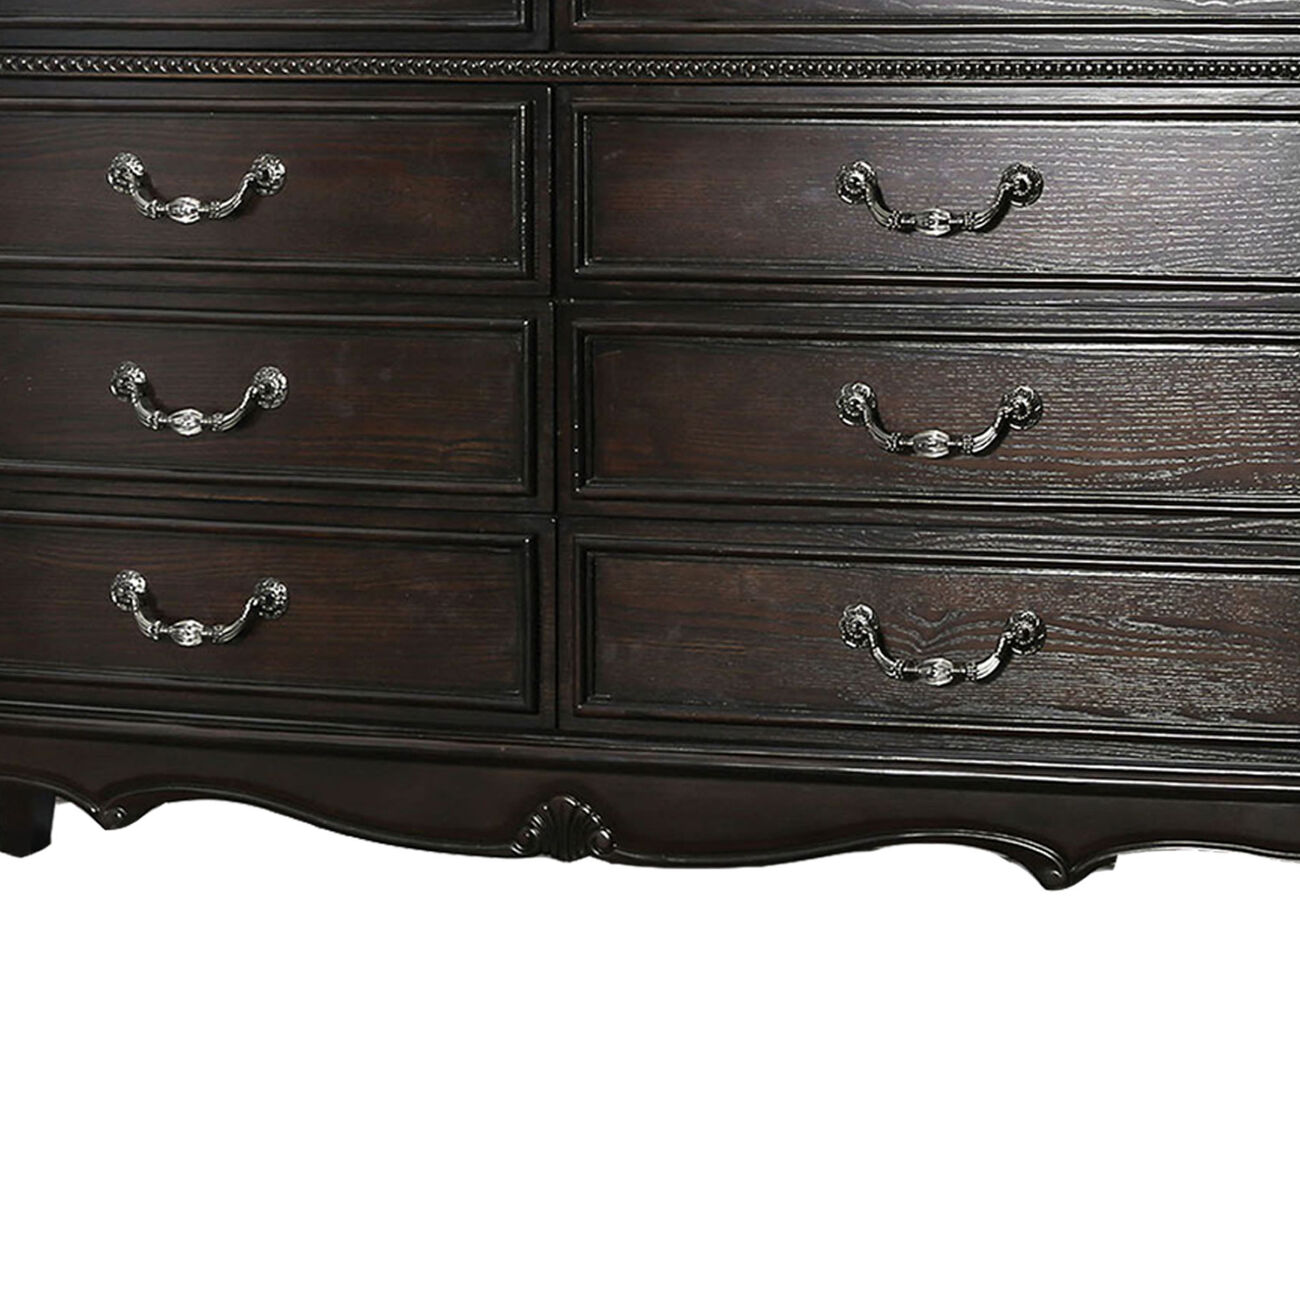 Traditional 8 Drawer Wooden Dresser with 2 Hidden Drawers, Brown